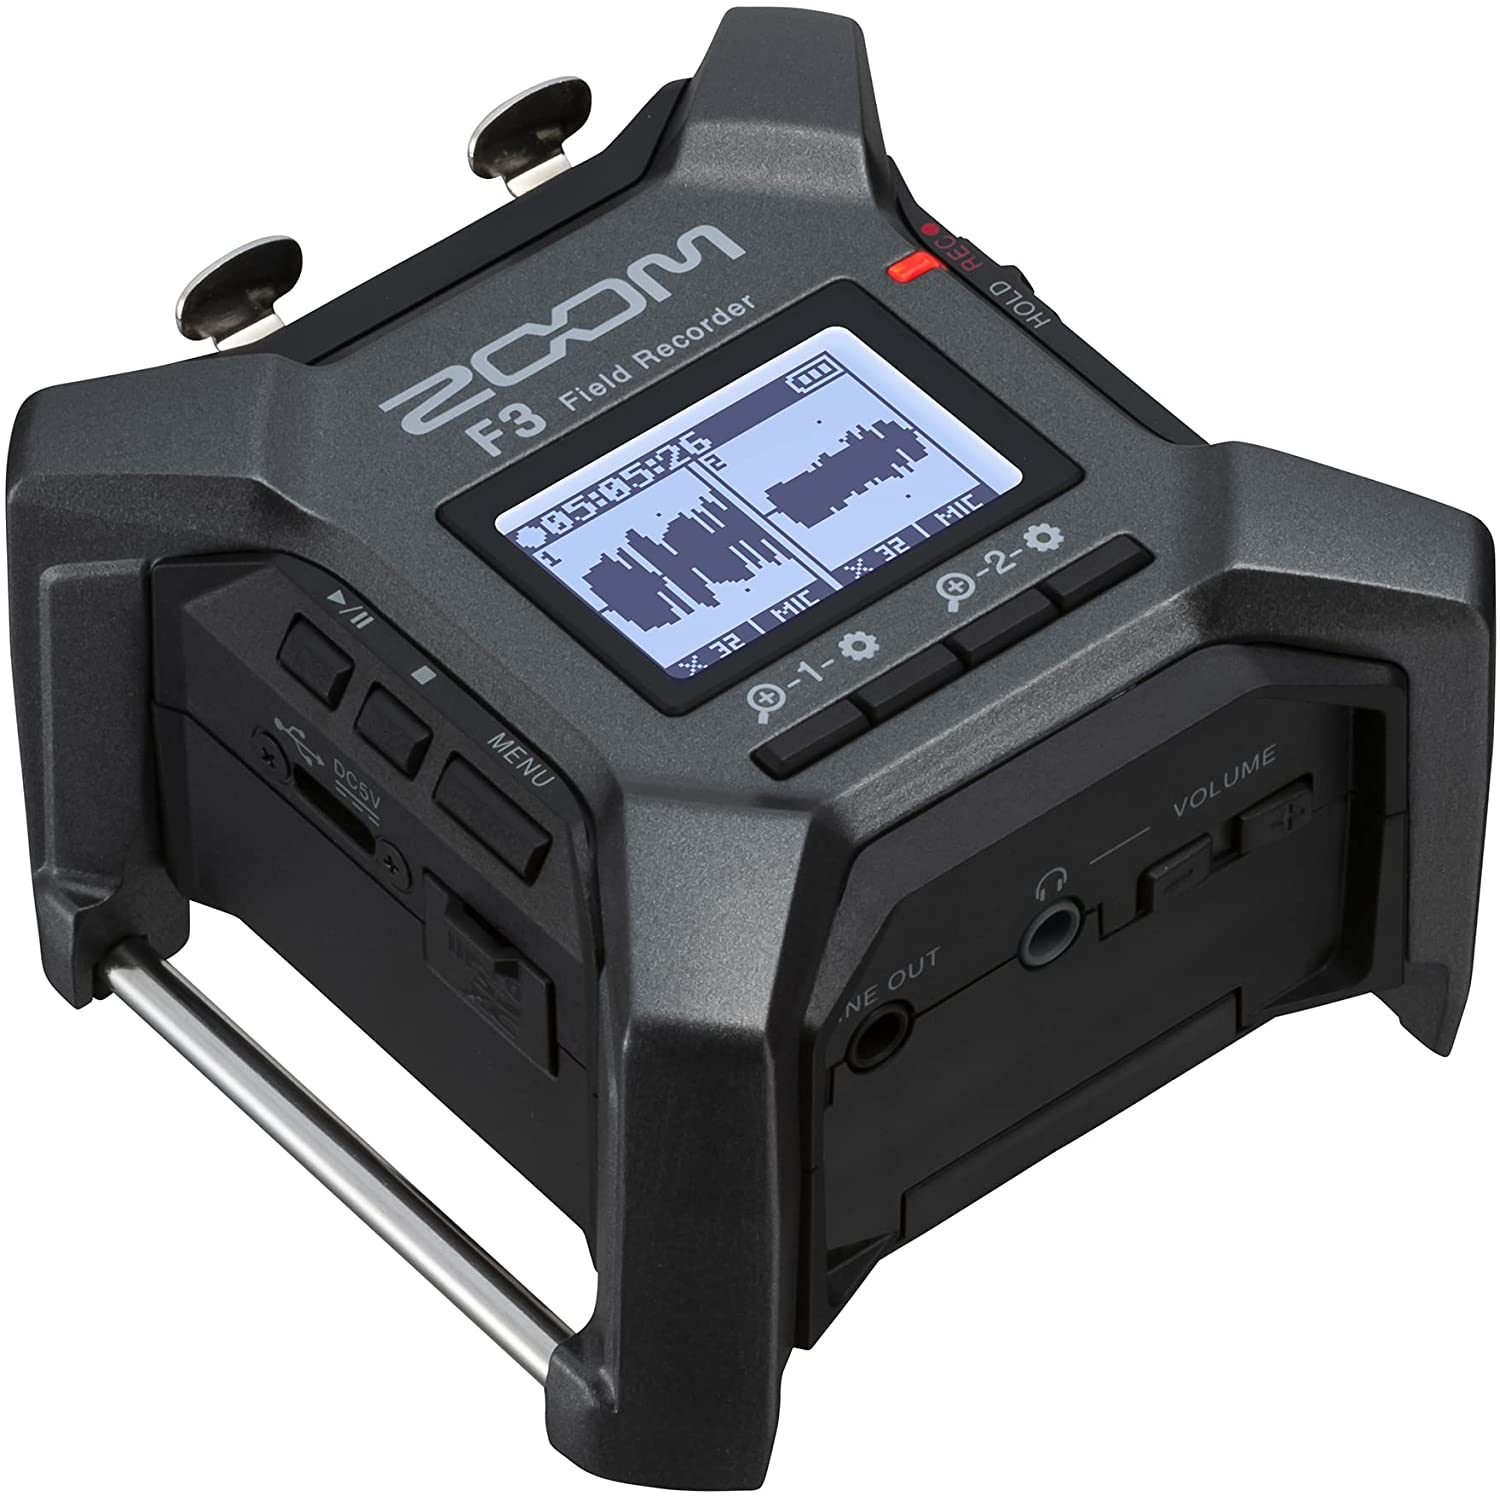 First look: Zoom F3 2-track 32-bit float recorder with 48 kHz sampling rate 10